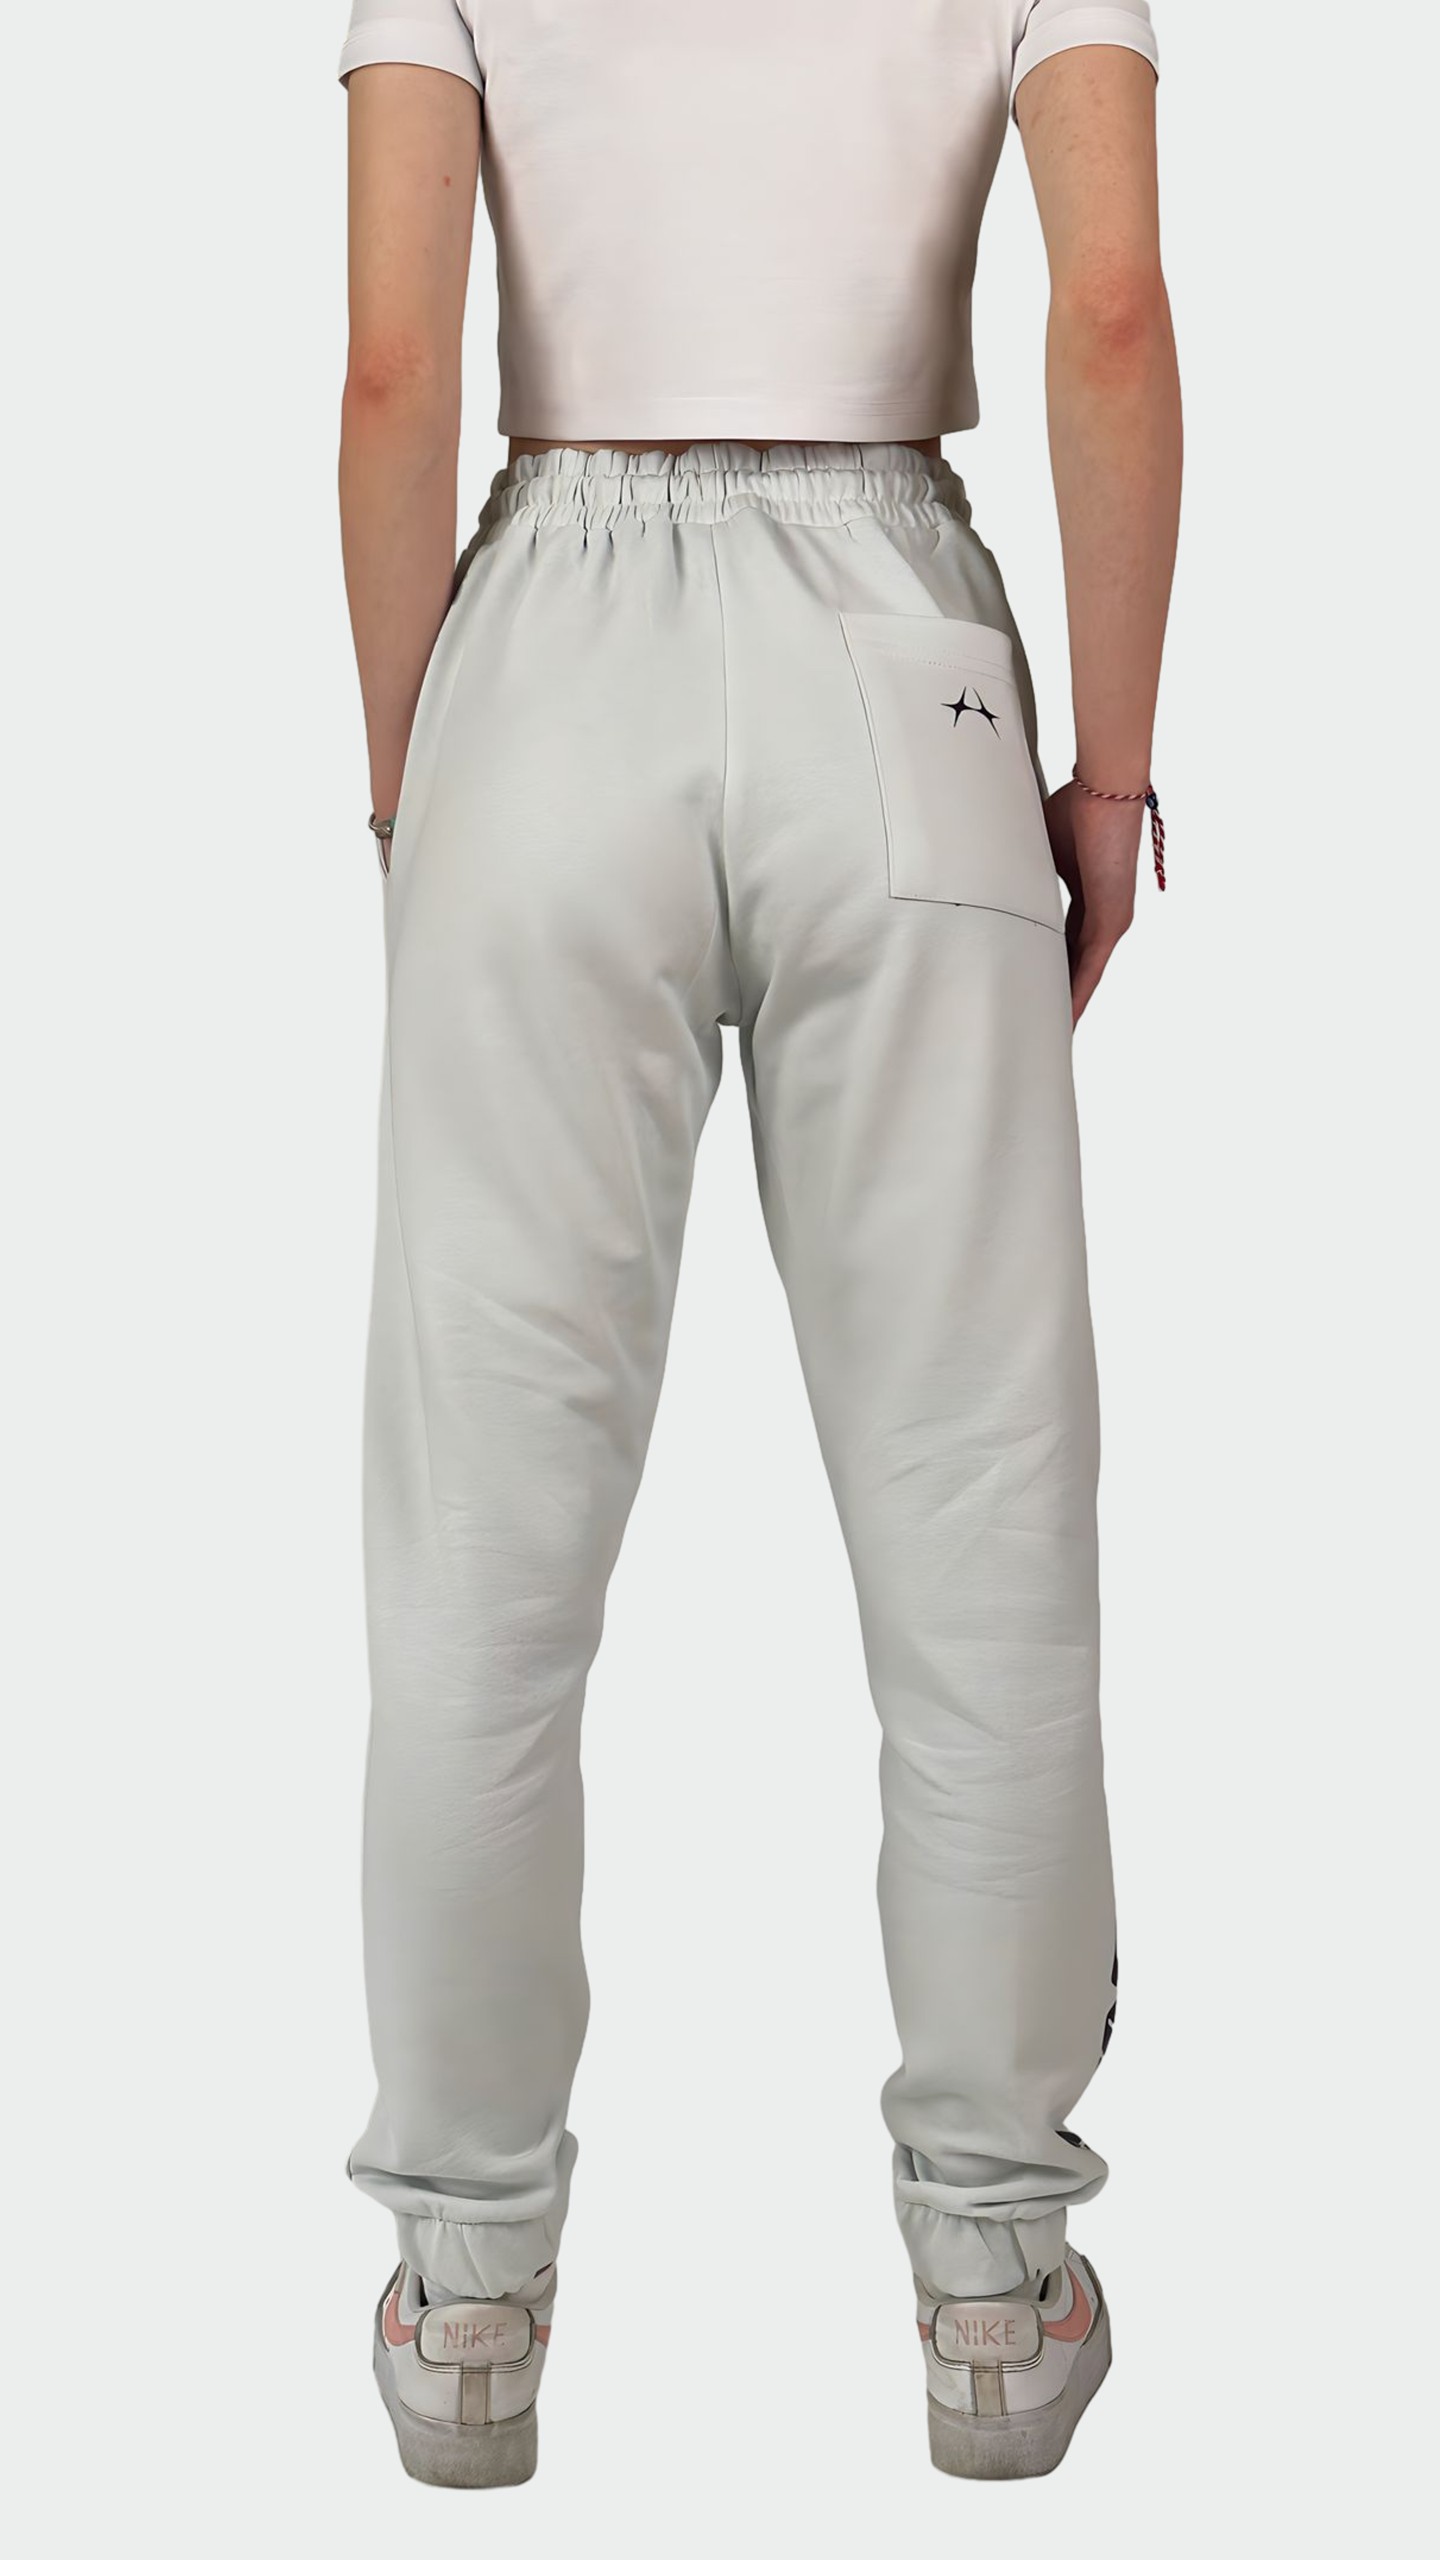 Butterfly Effect Sweatpant